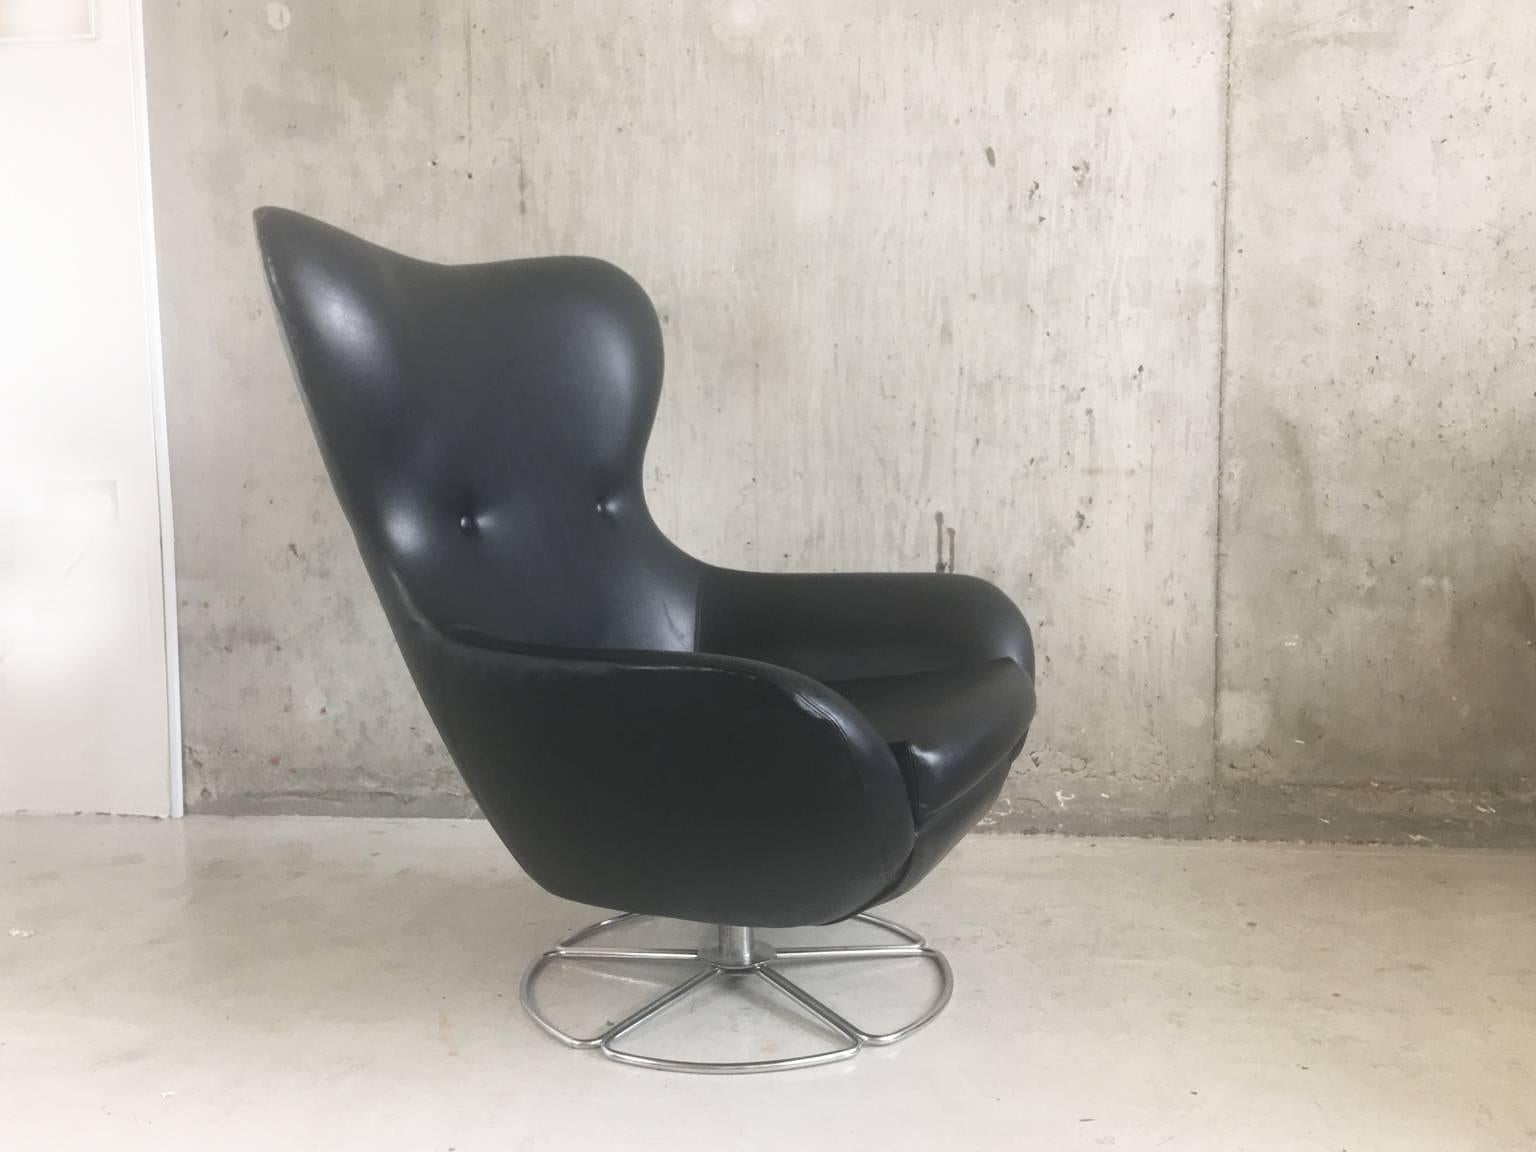 1970s Mid-Century Large Black Vinyl Lounge Chair In Good Condition For Sale In London, GB